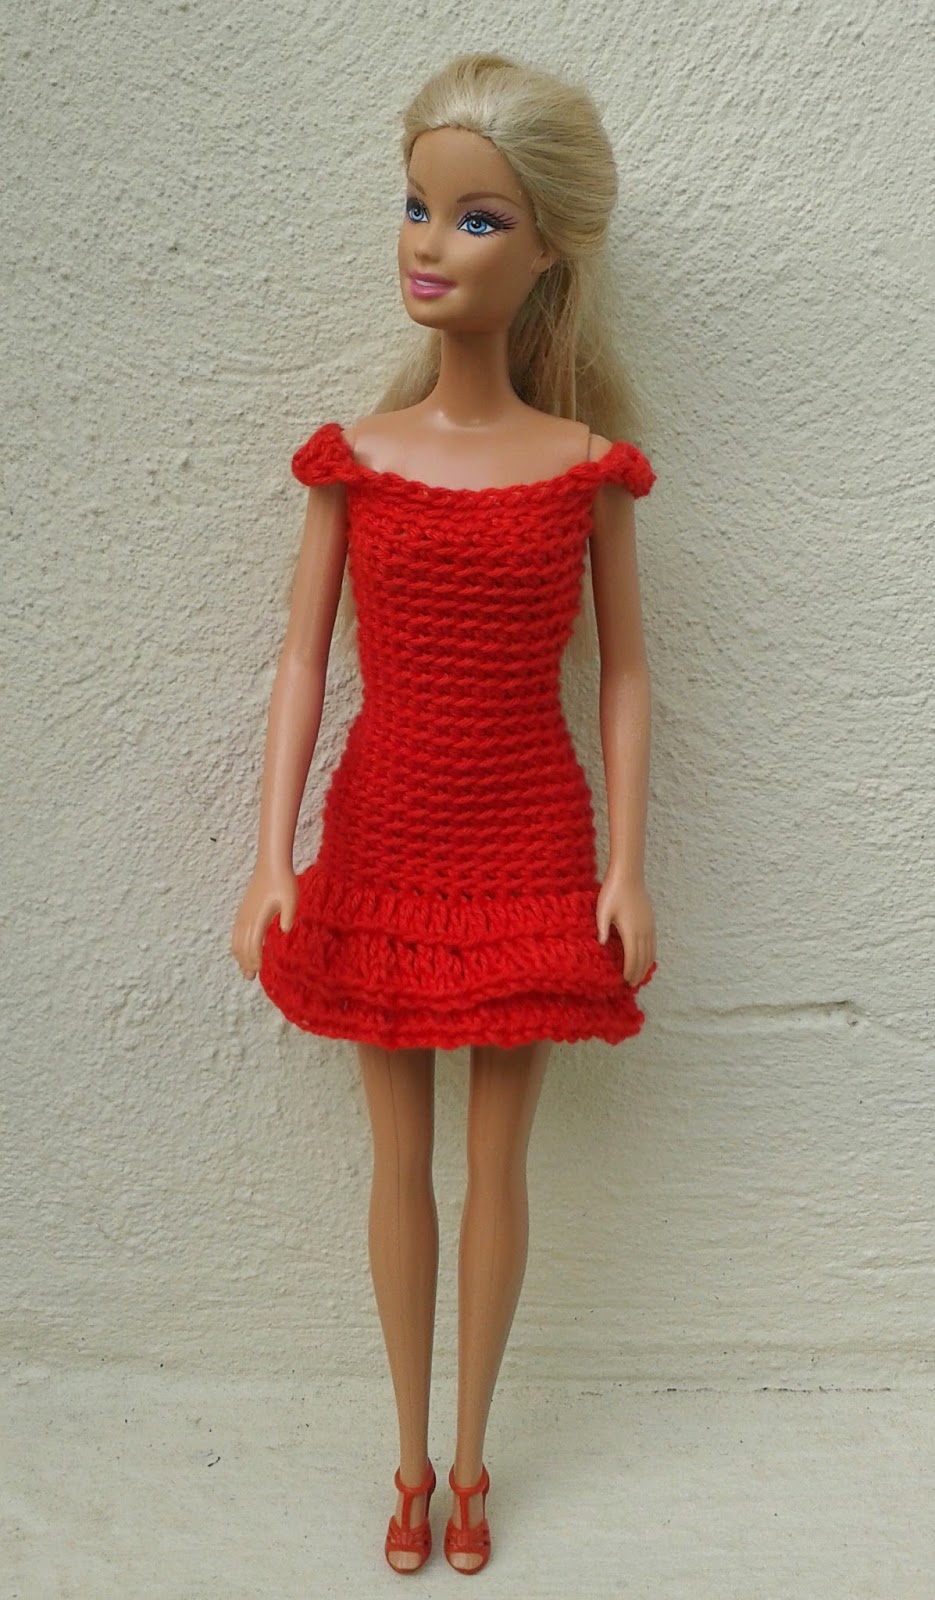 Linmary Knits Barbie in red crochet dresses